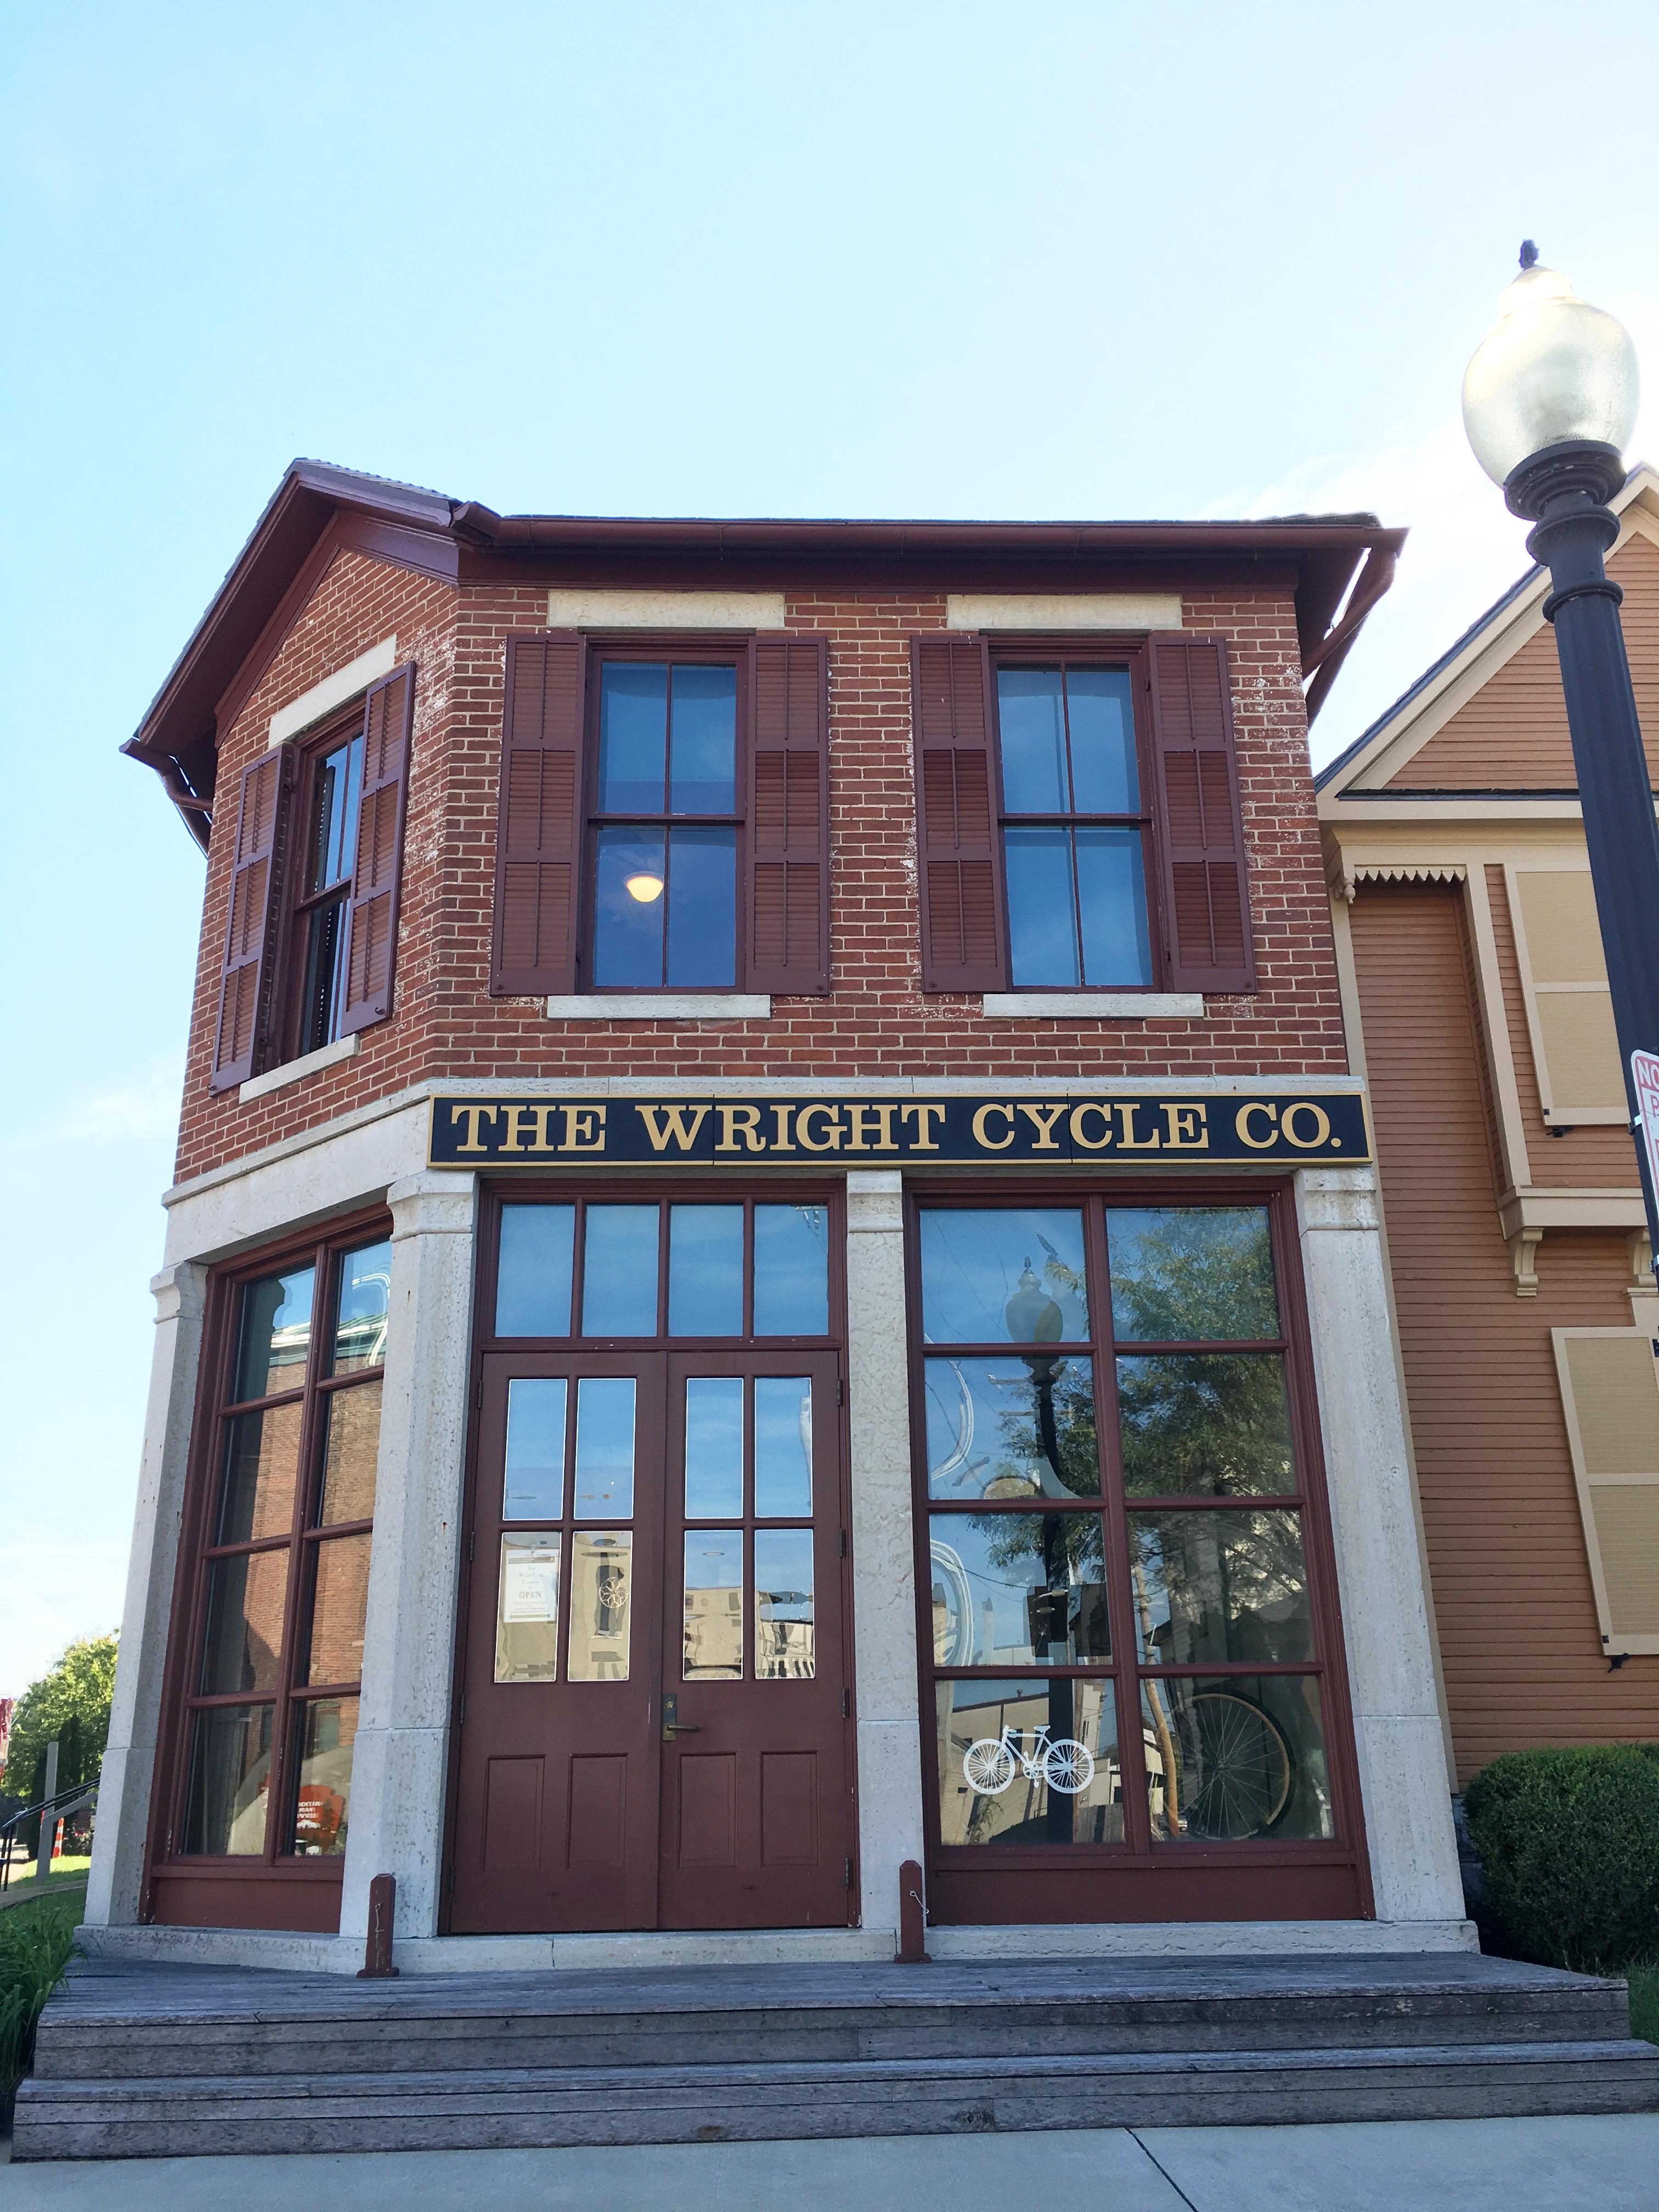 A two-story brick building with tall windows and shutters on them with sign "The Wright Cycle Co."